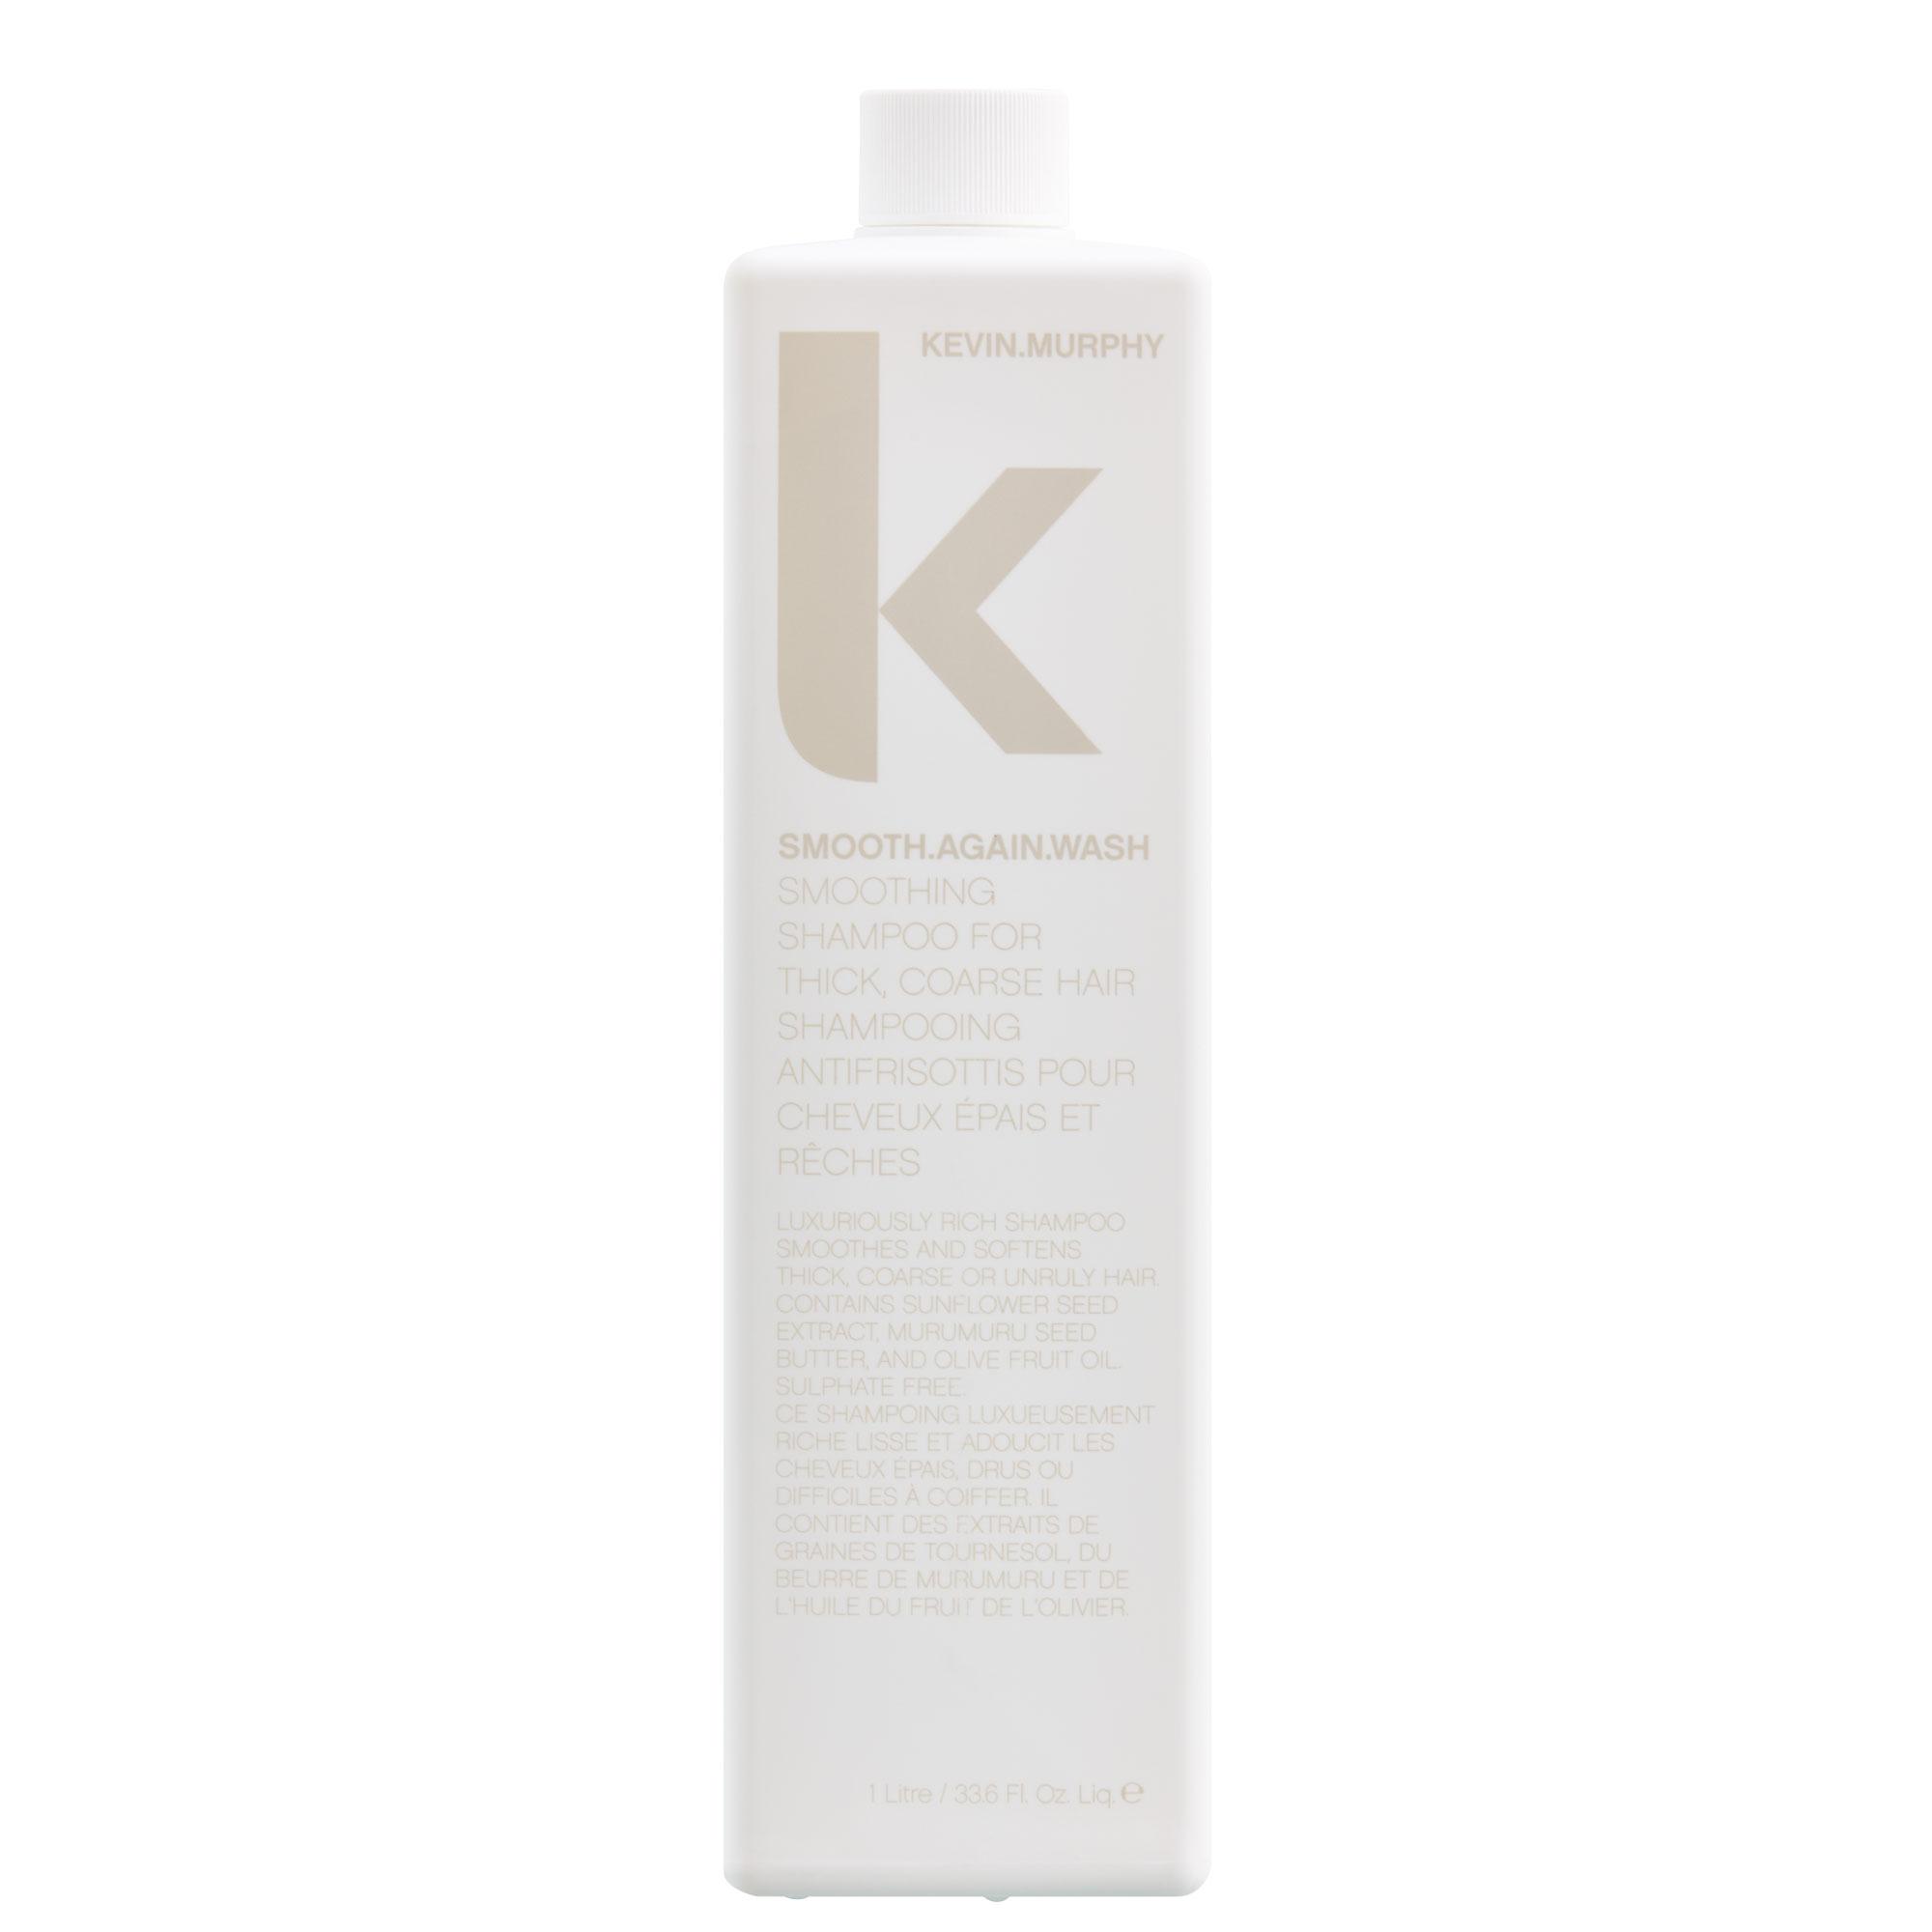 KEVIN.MURPHY SMOOTH.AGAIN WASH